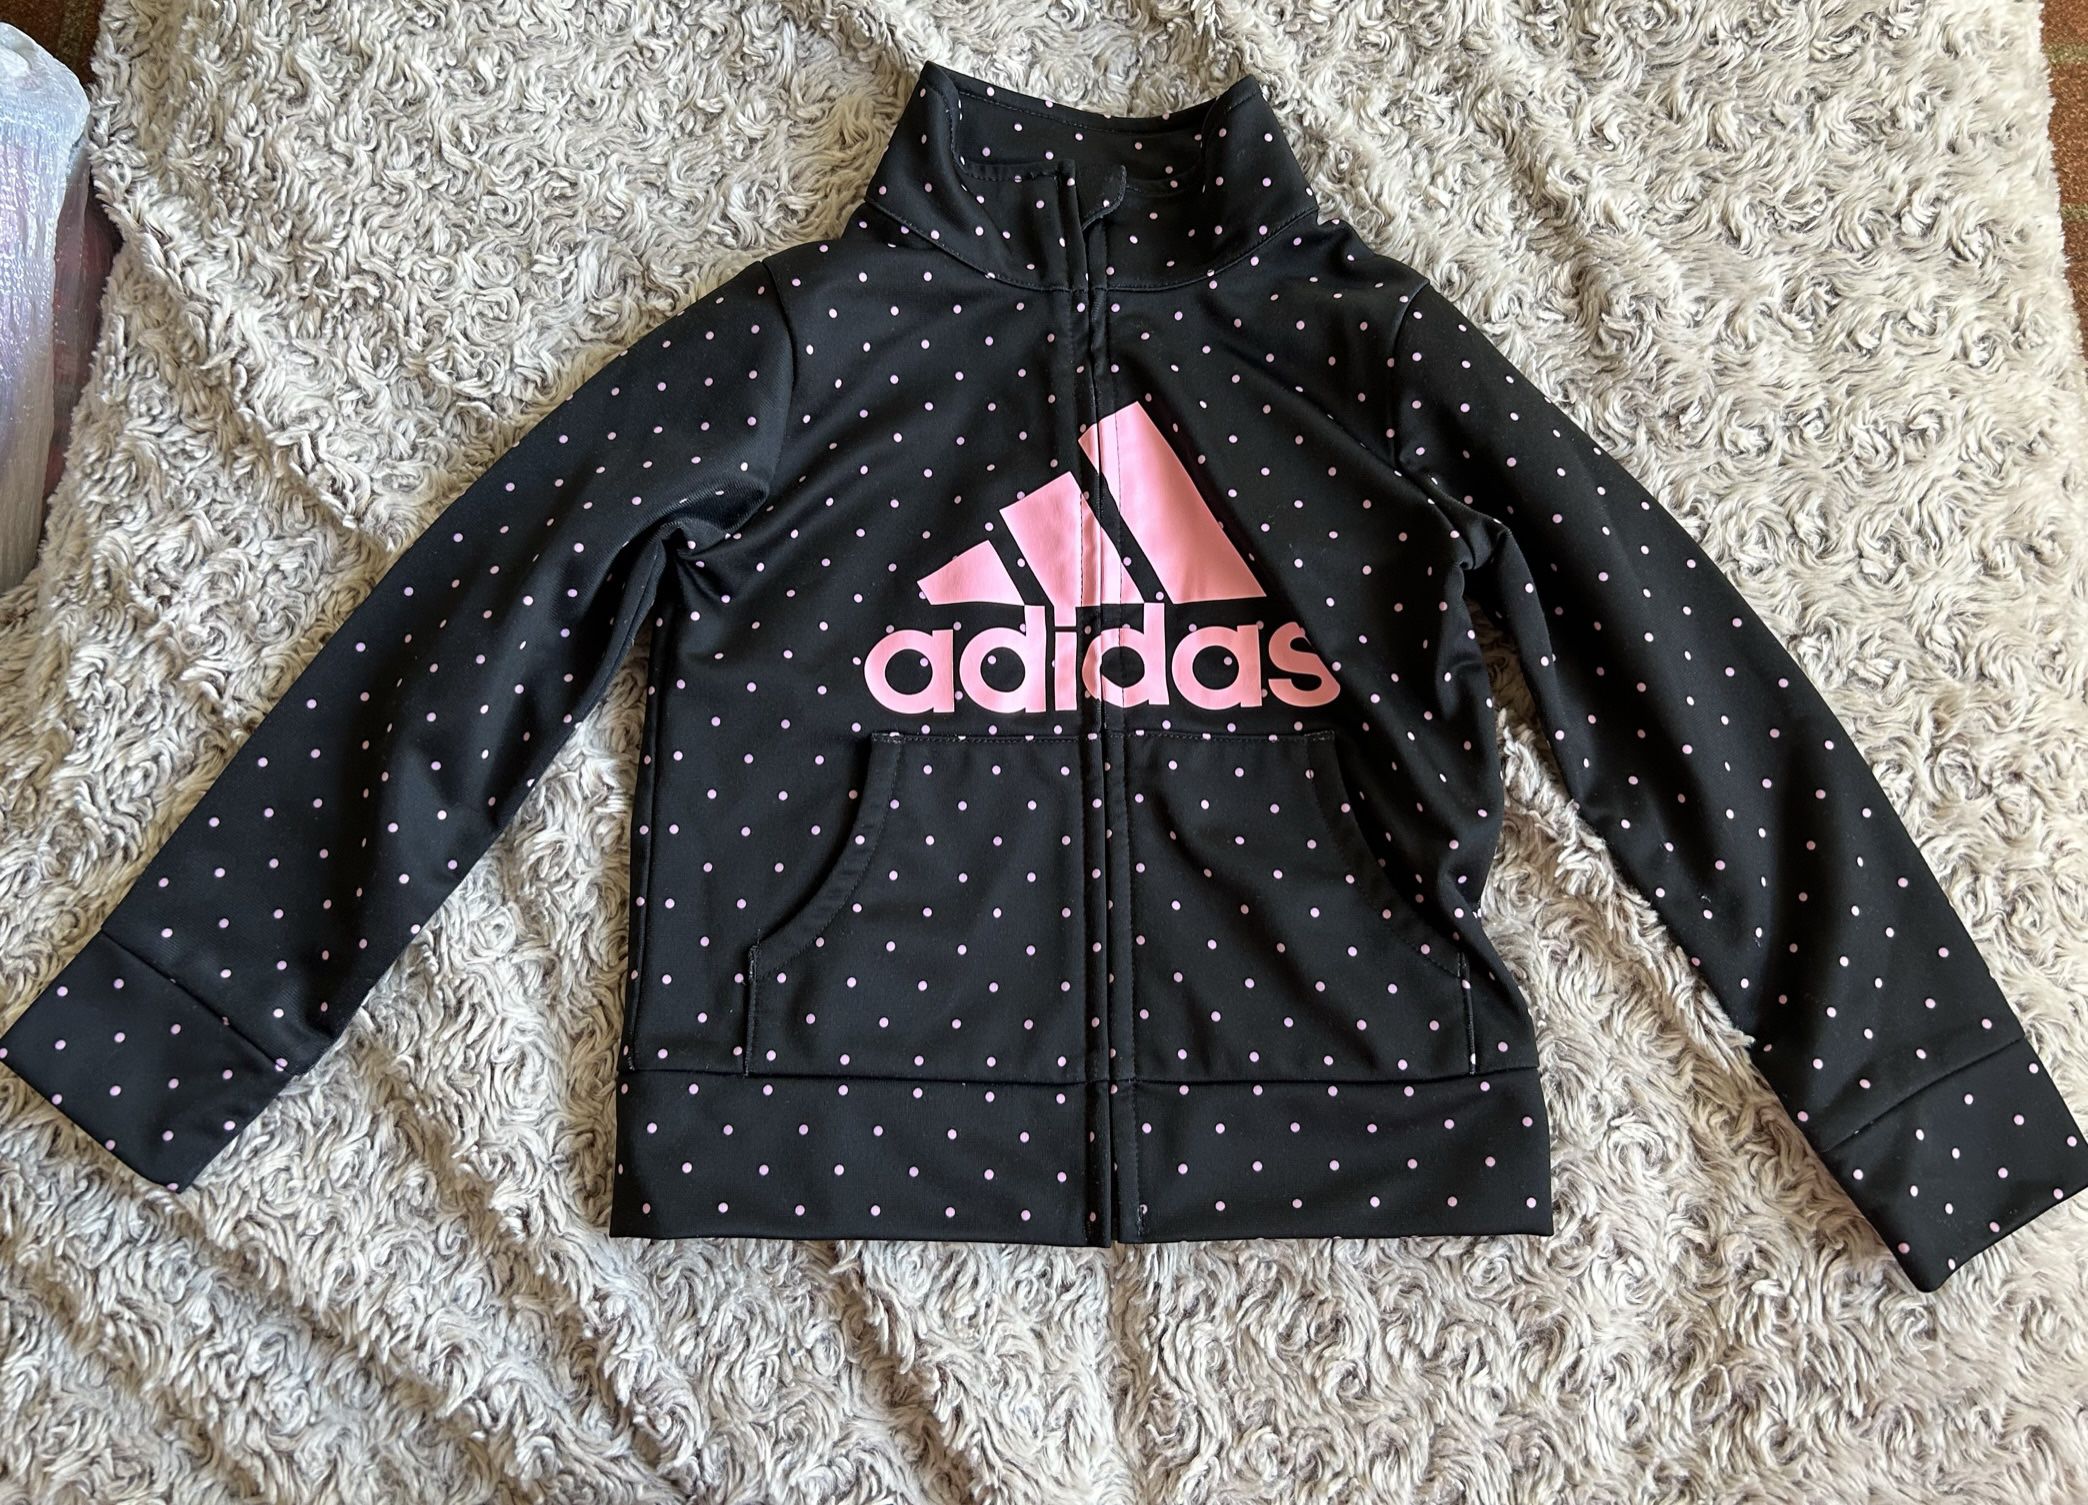 Toddler Size 3t